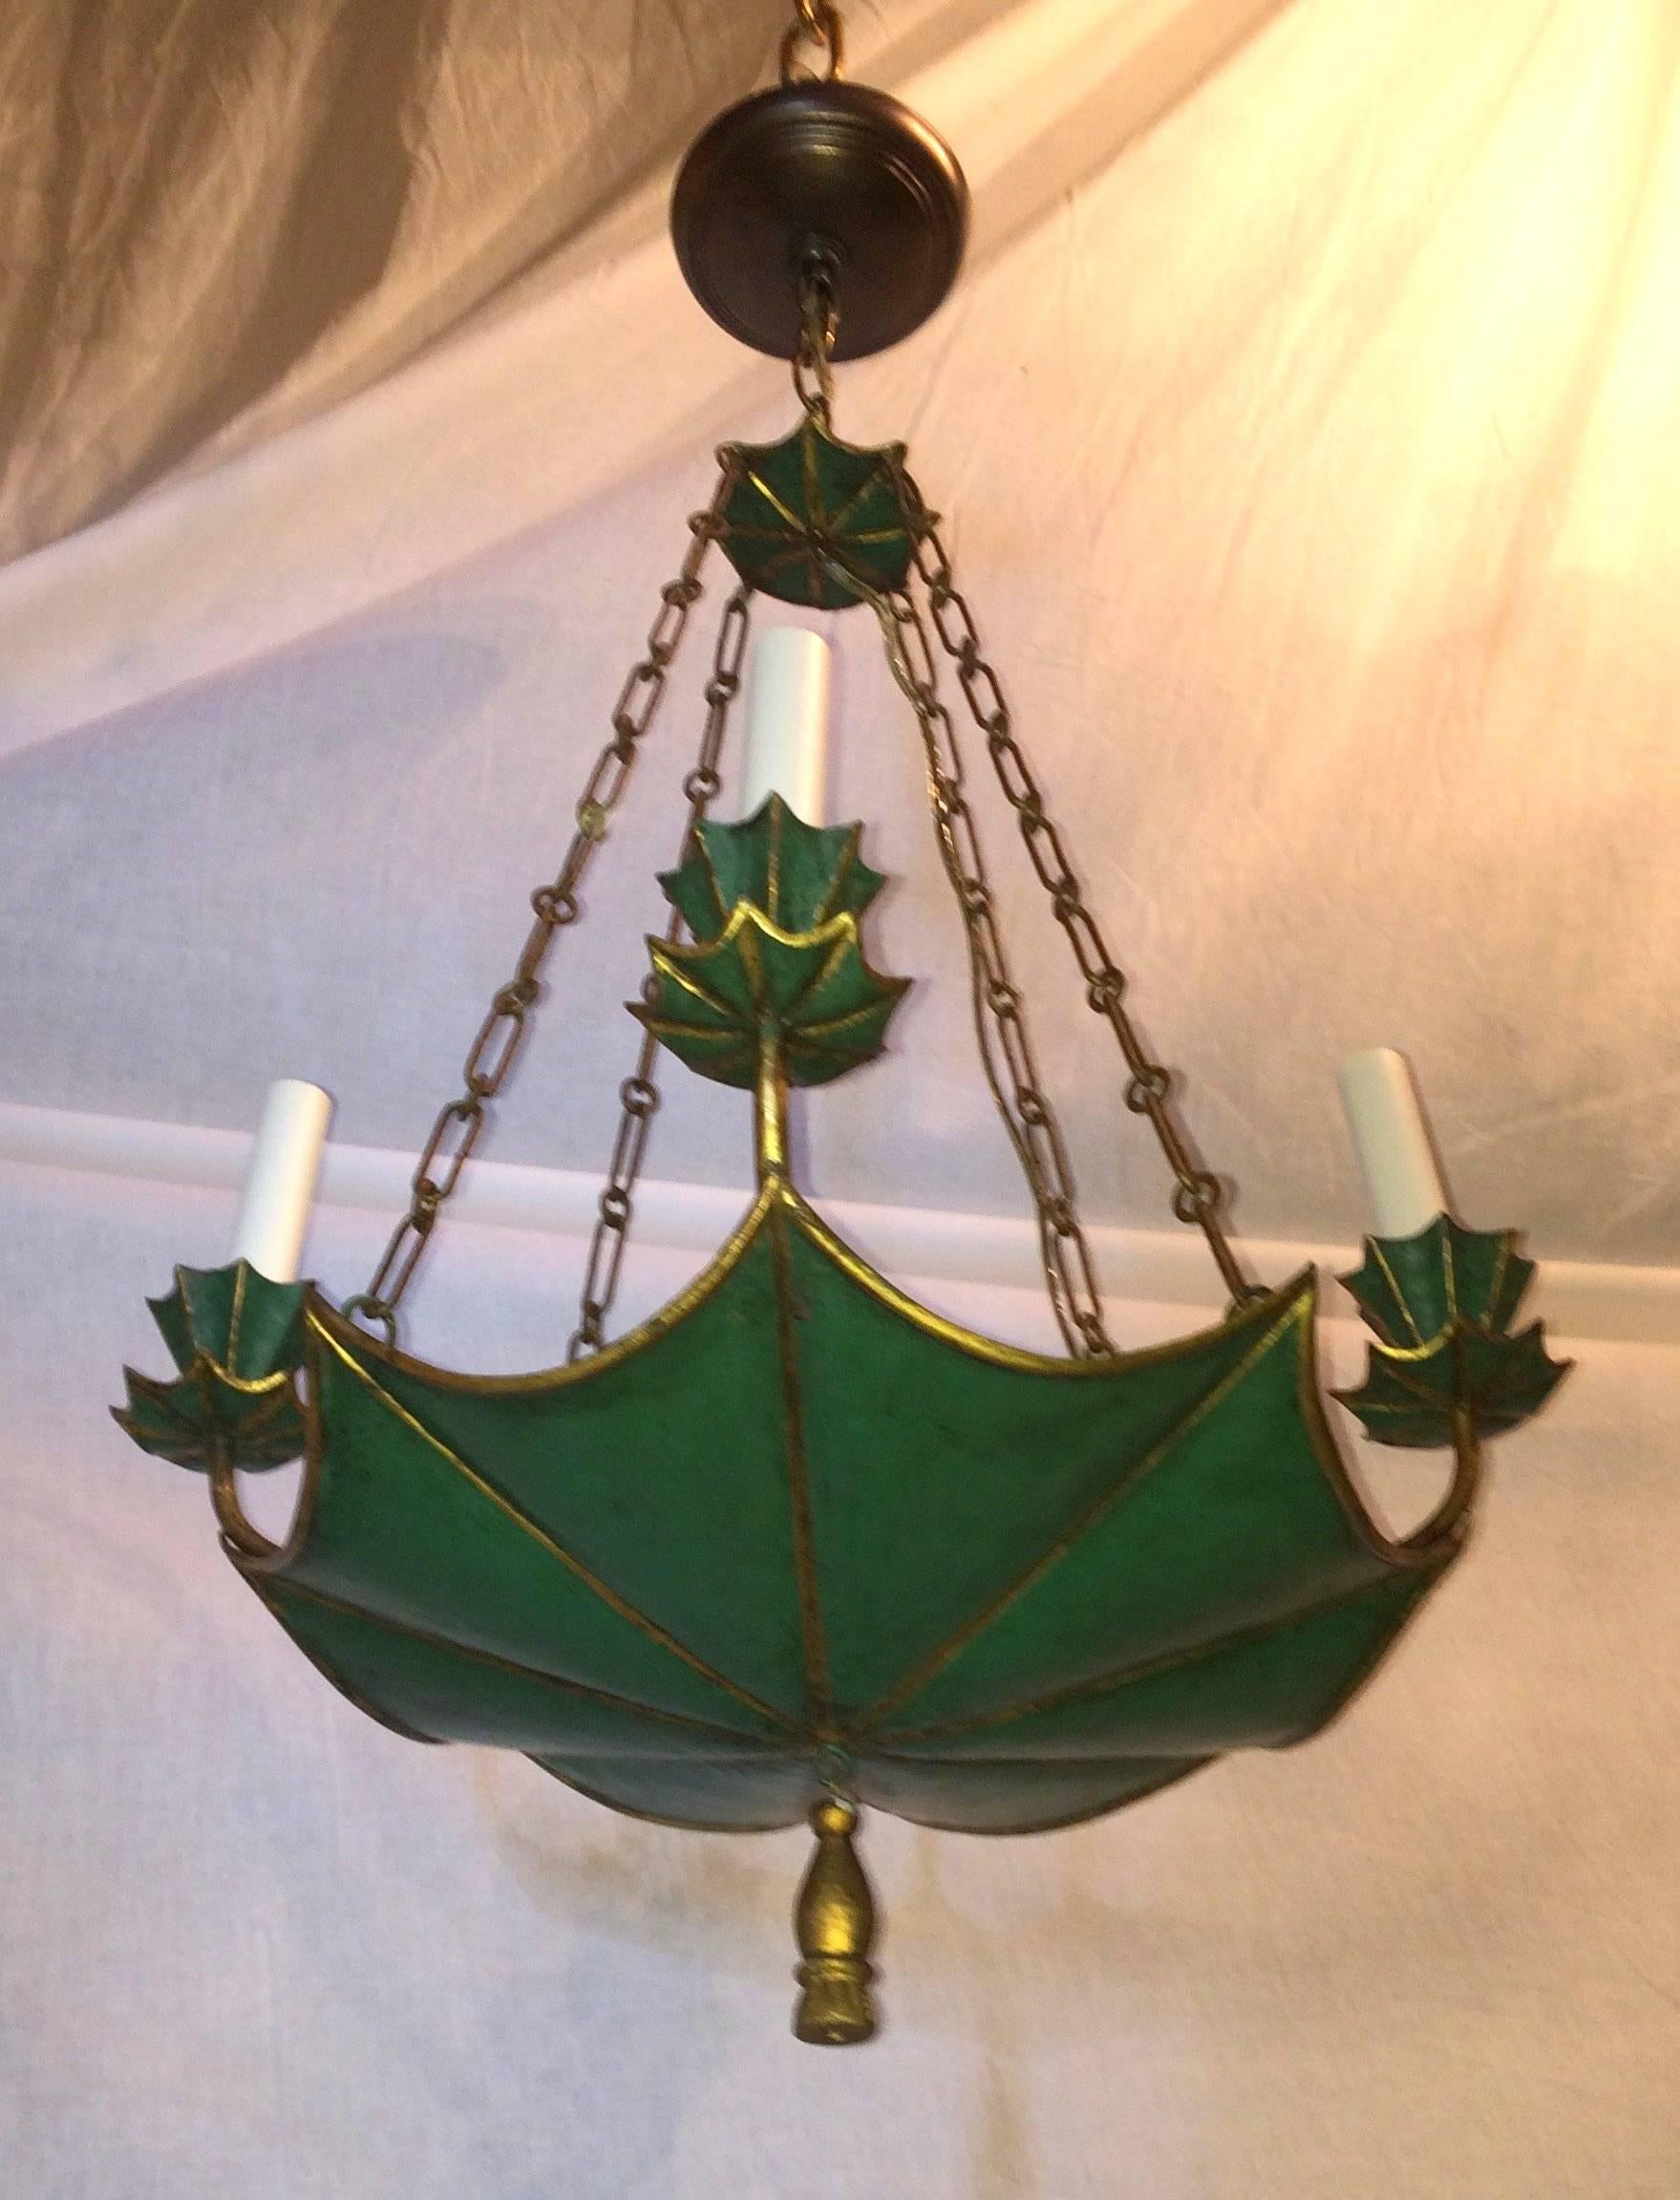 Wonderful green and gilt tole four-light chandelier vintage fixture wood tassel.
Four lights on the outside and two lights on the in side.

Measures: 18" W x 32" H (adj. height).